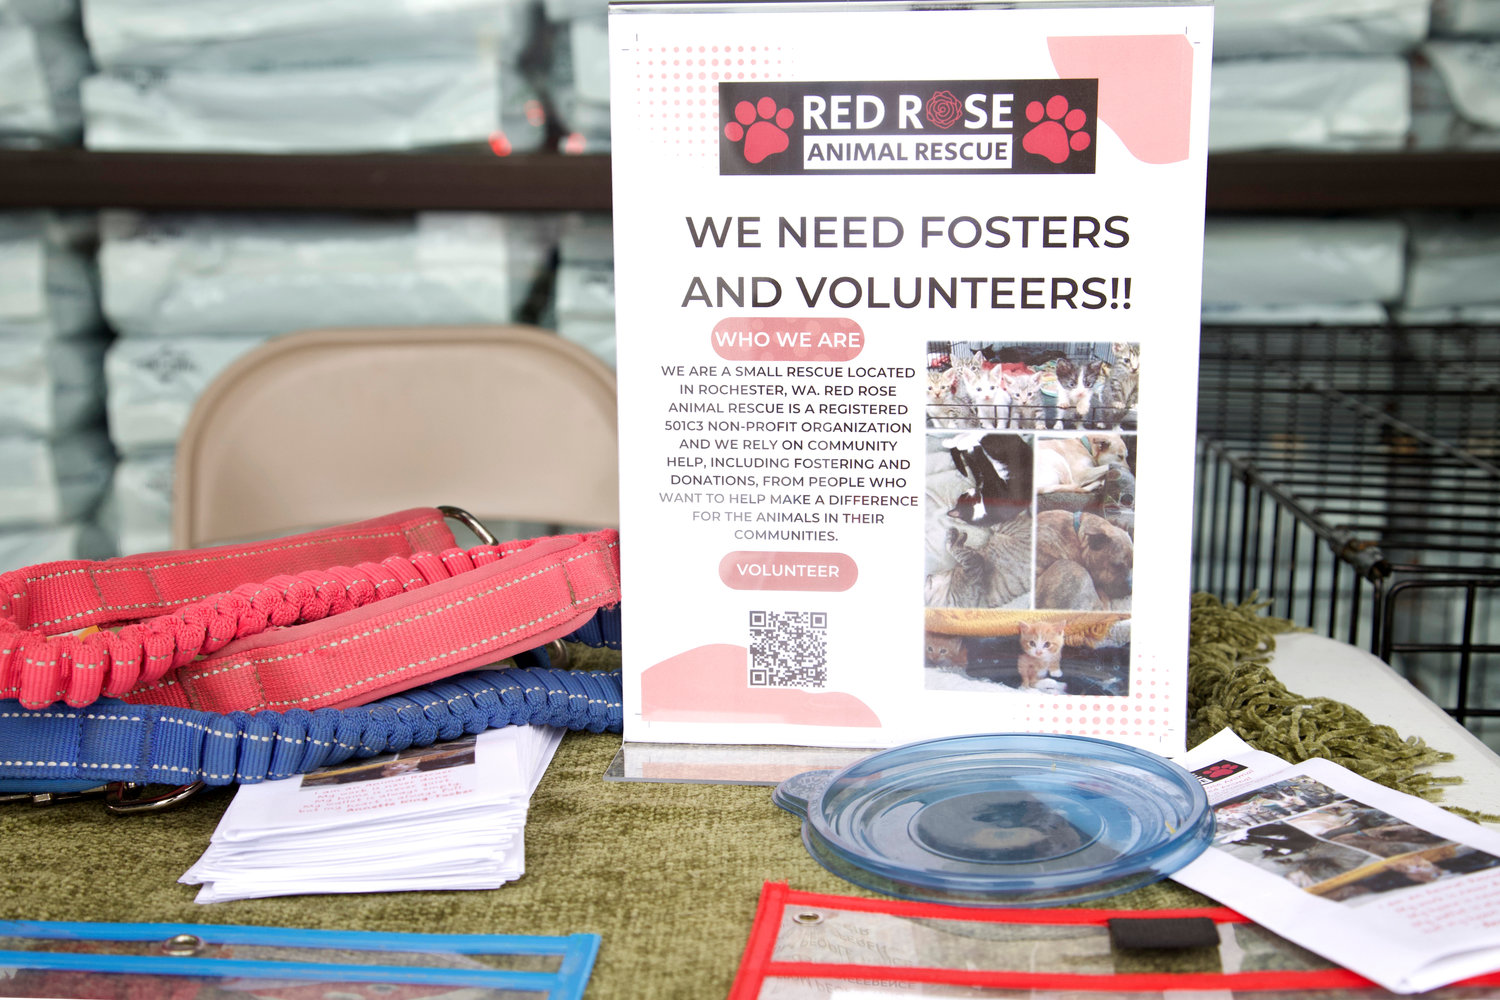 Red Rose Animal Rescue operates an informational booth during an adoption event at Petsense in Chehalis on Saturday.